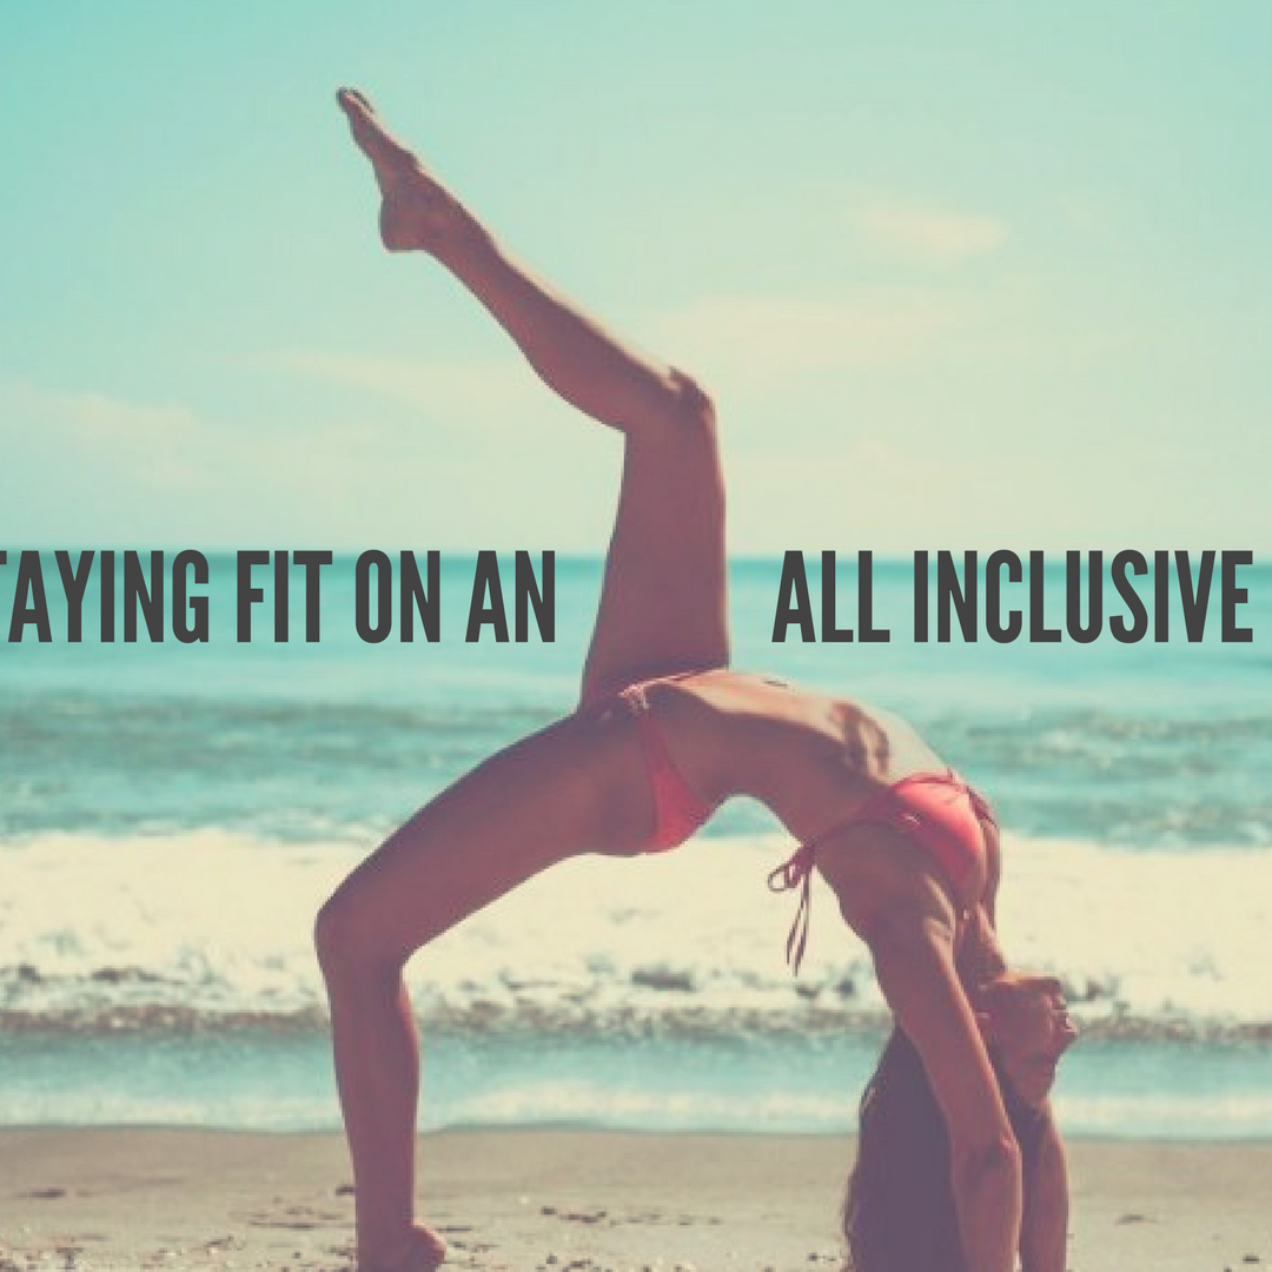 STAYING FIT ON AN ALL INCLUSIVE VACATION